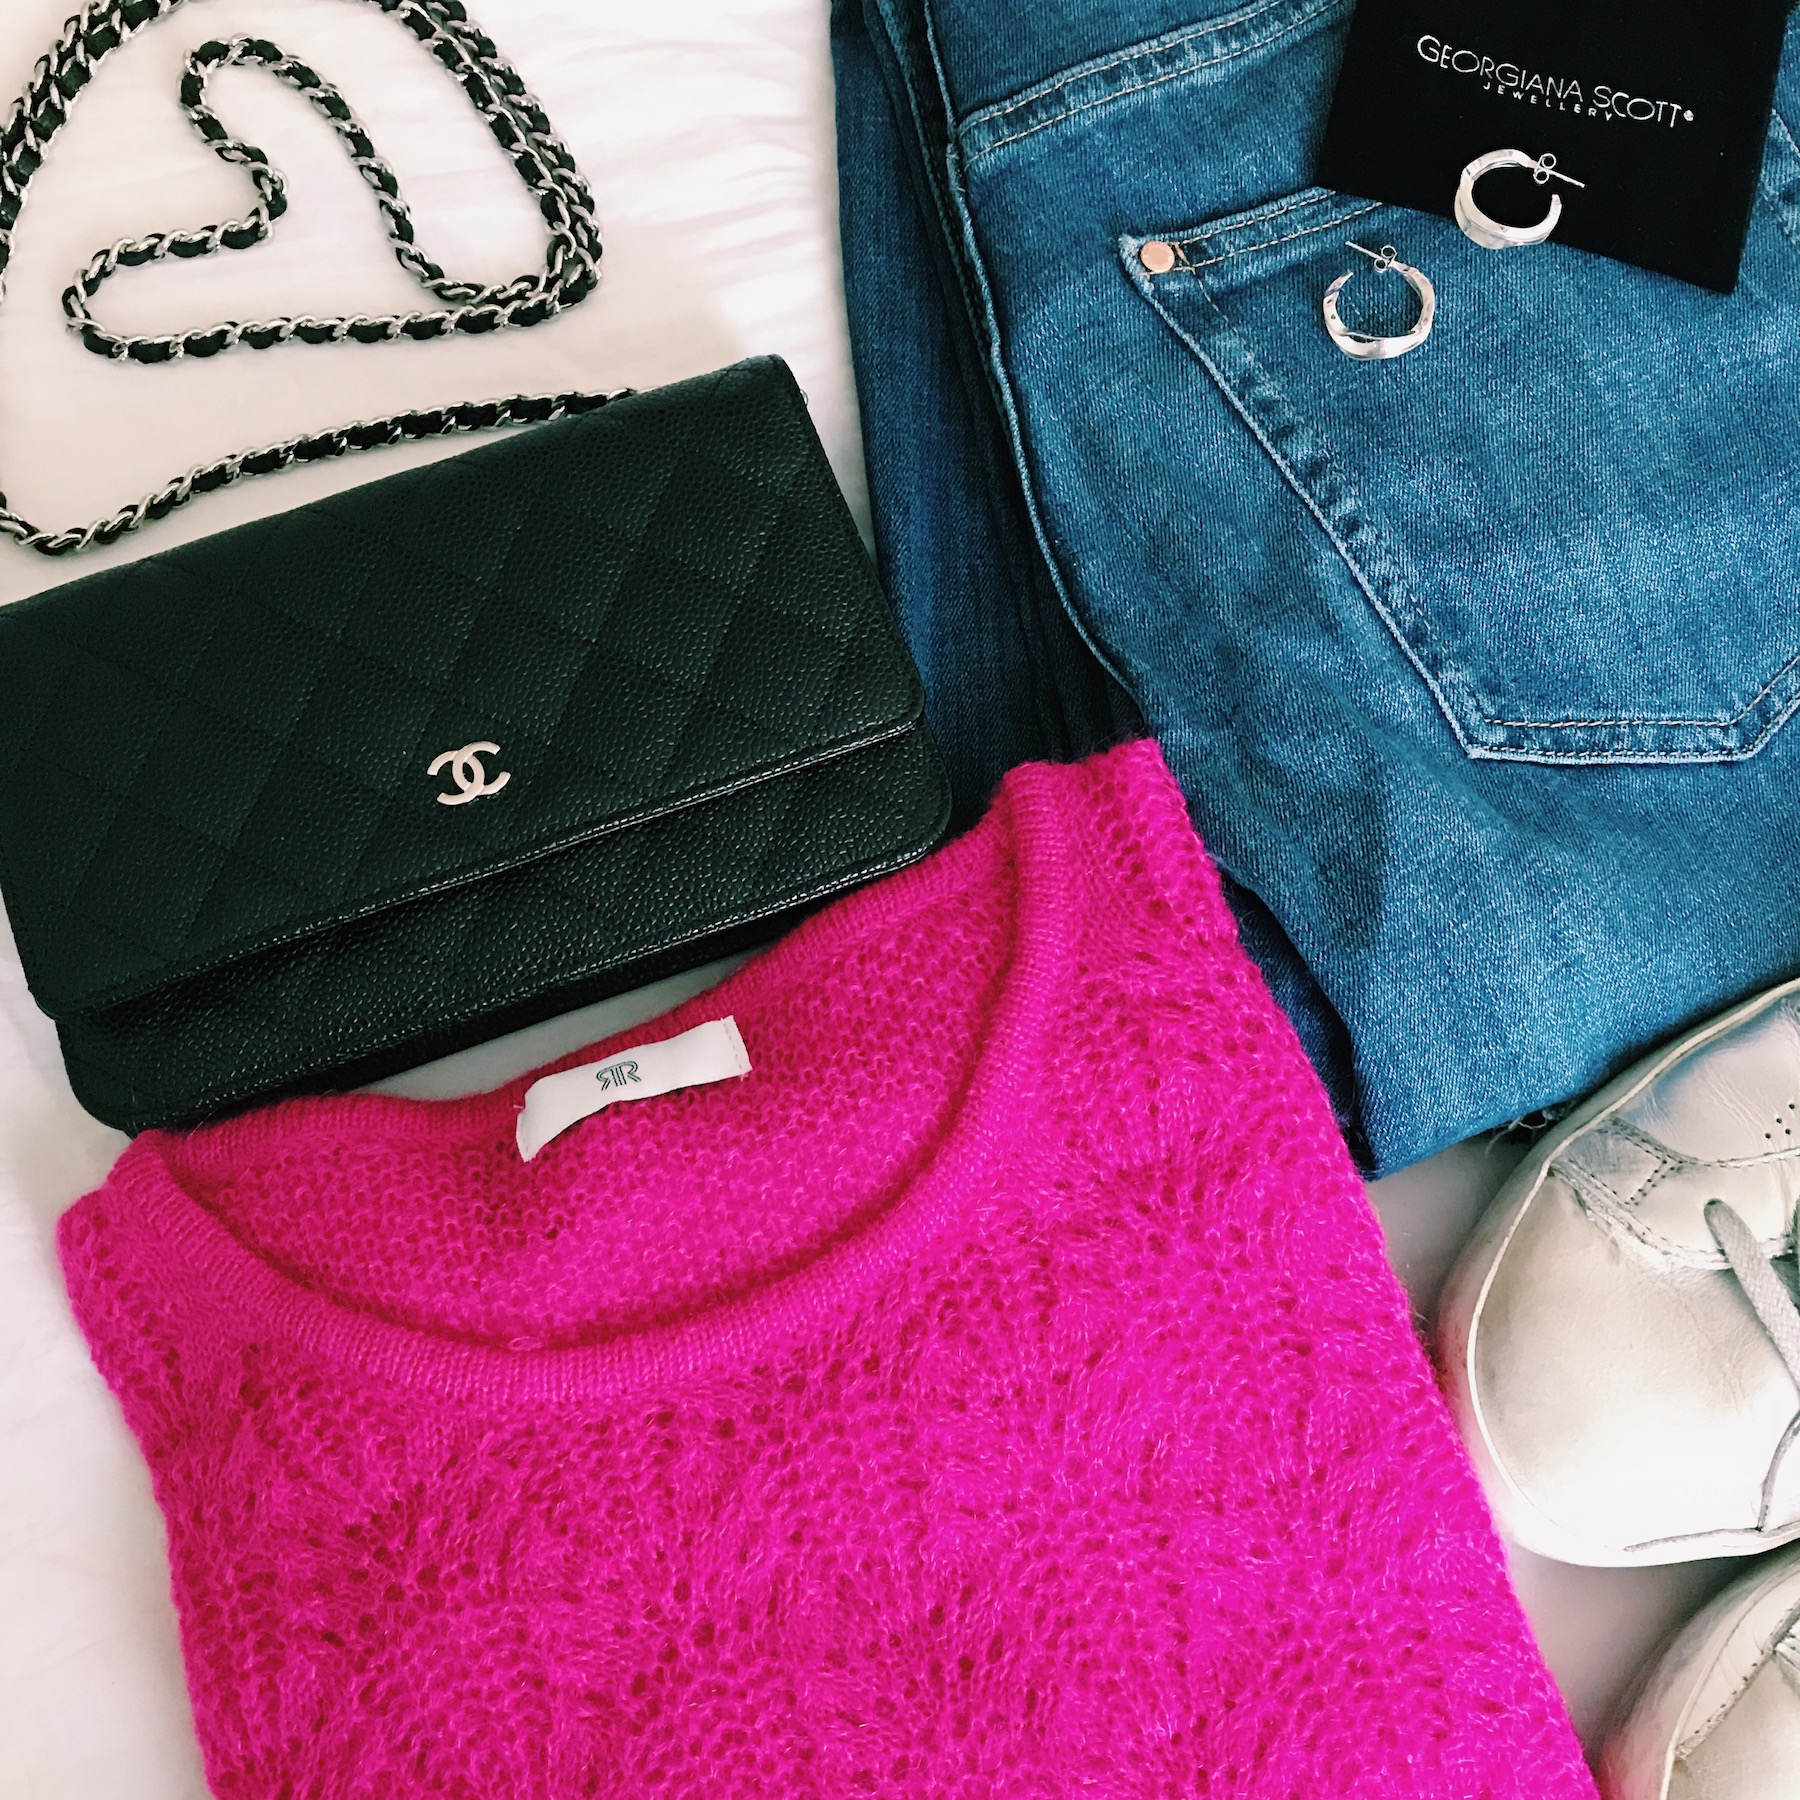 Outfit Flatlay With Pink Jumper Jeans and Georgiana Scott Hoop Earrings